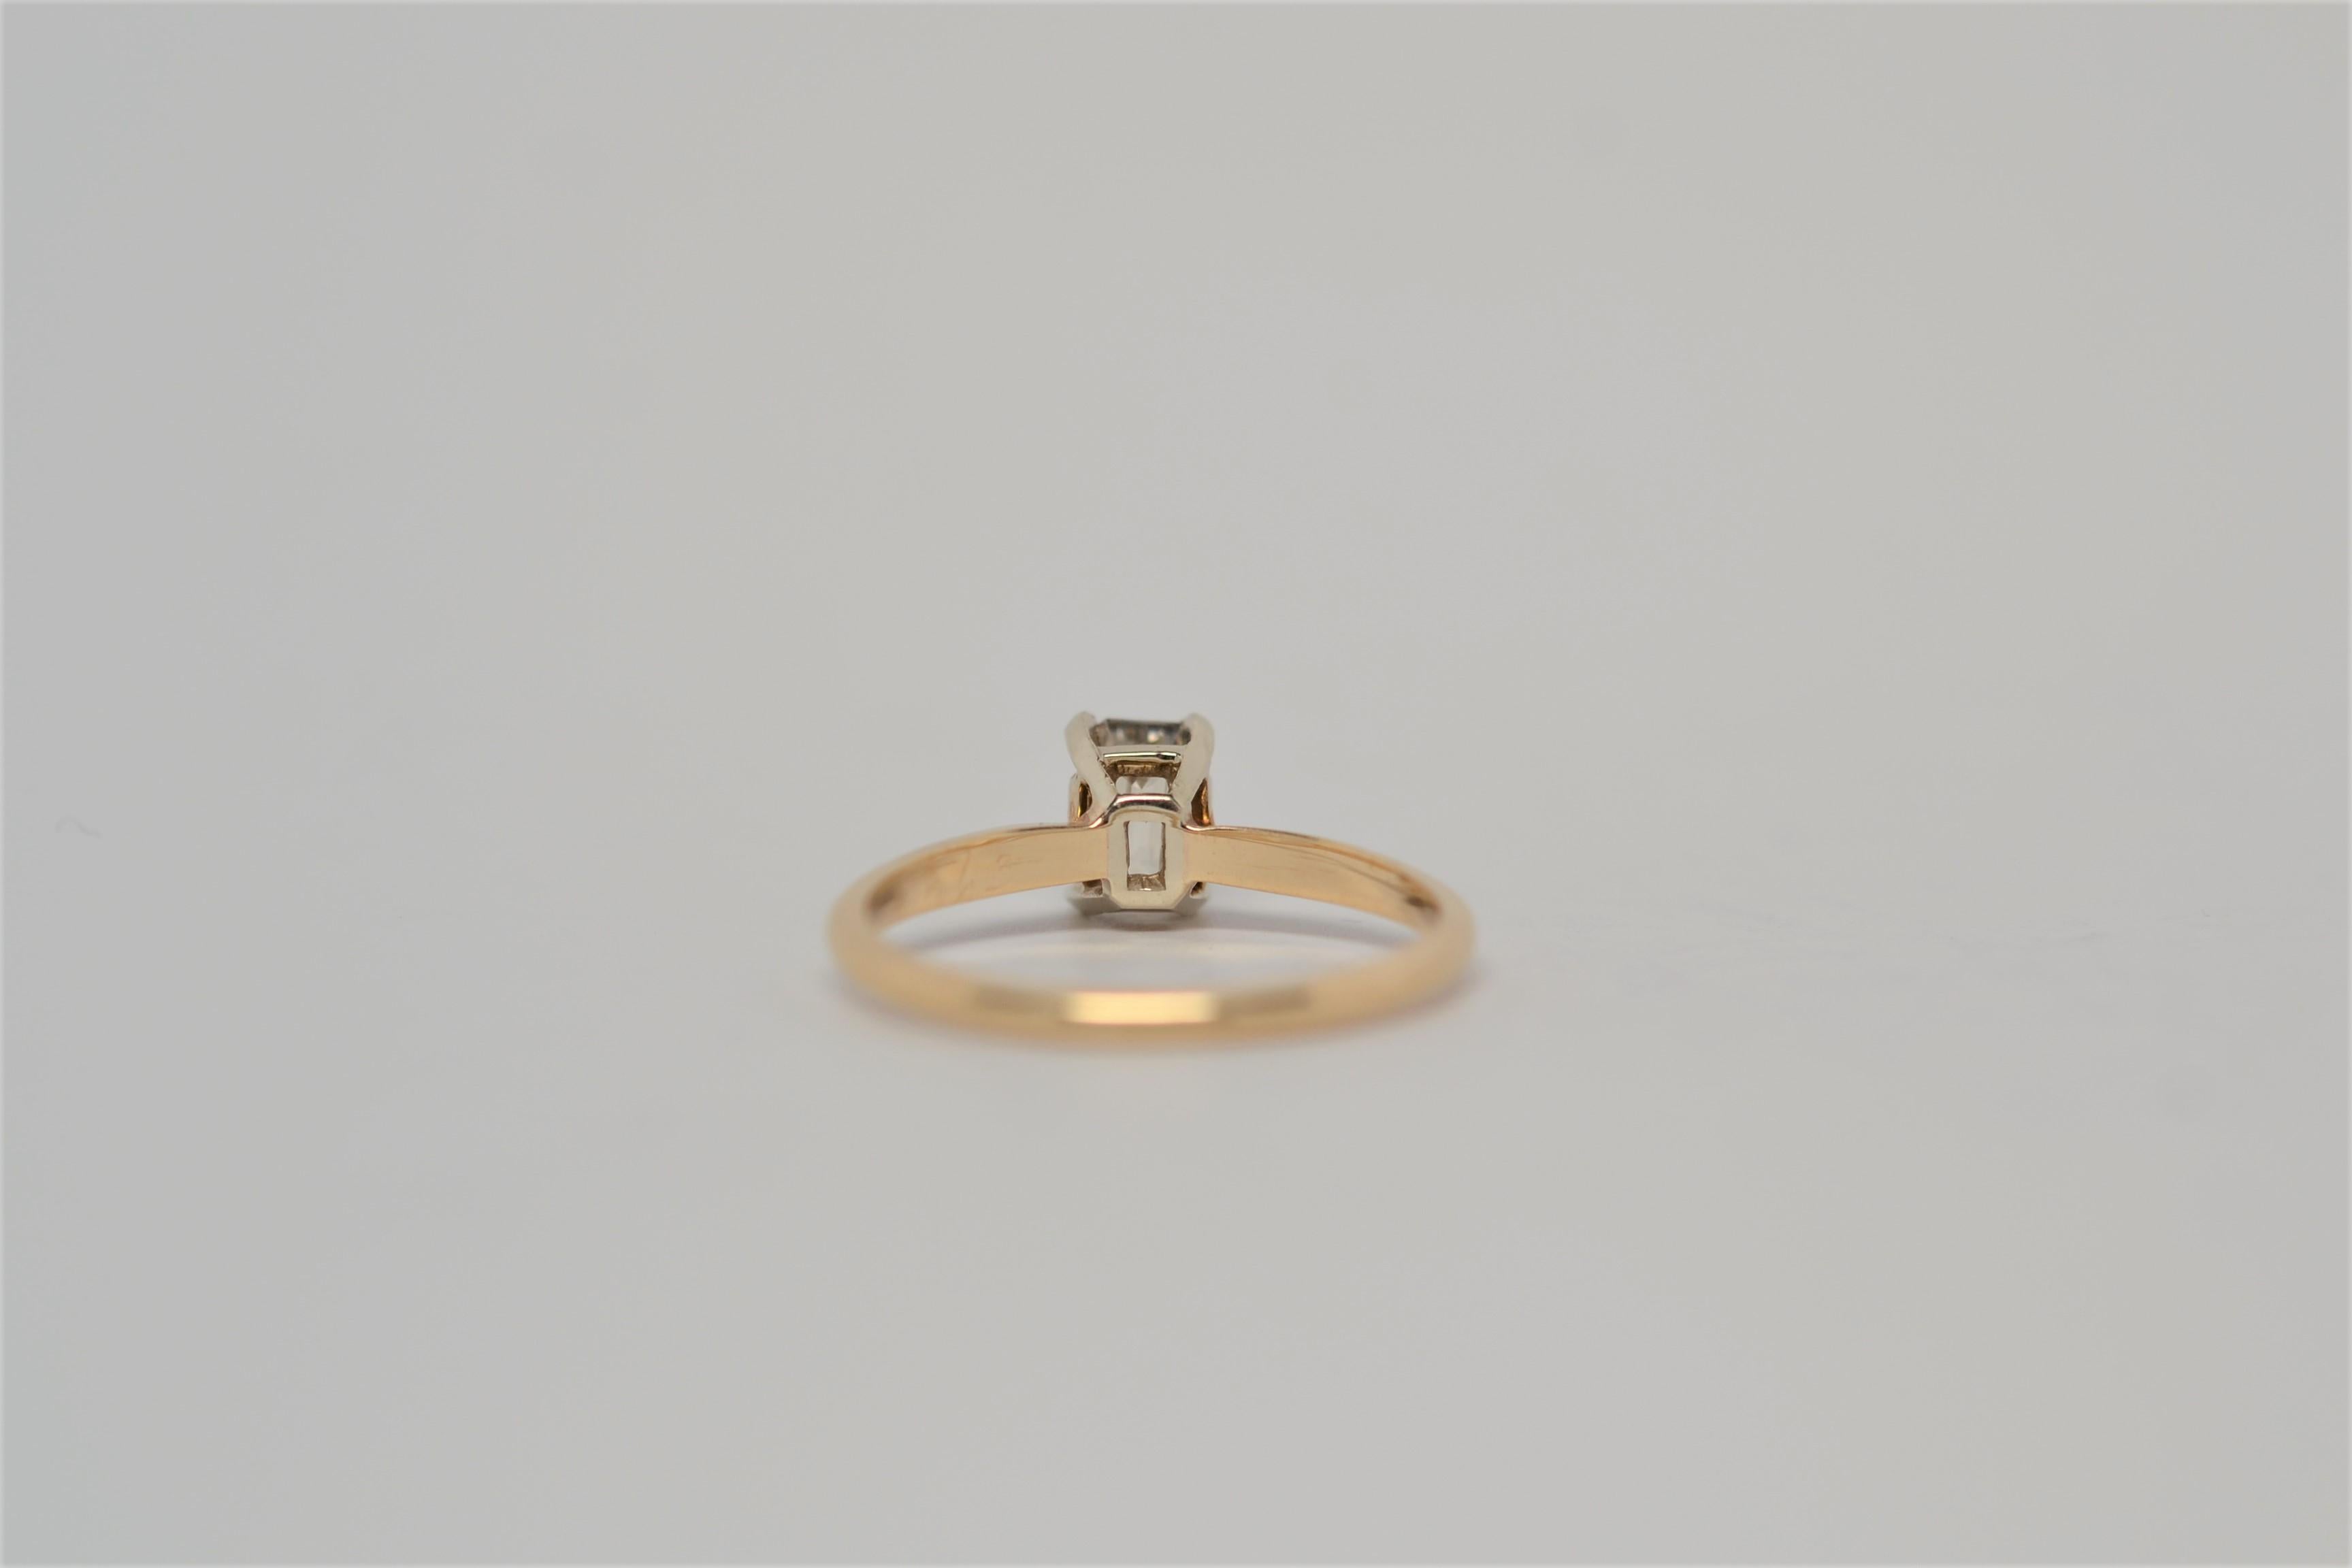 18k white gold solitaire engagement ring